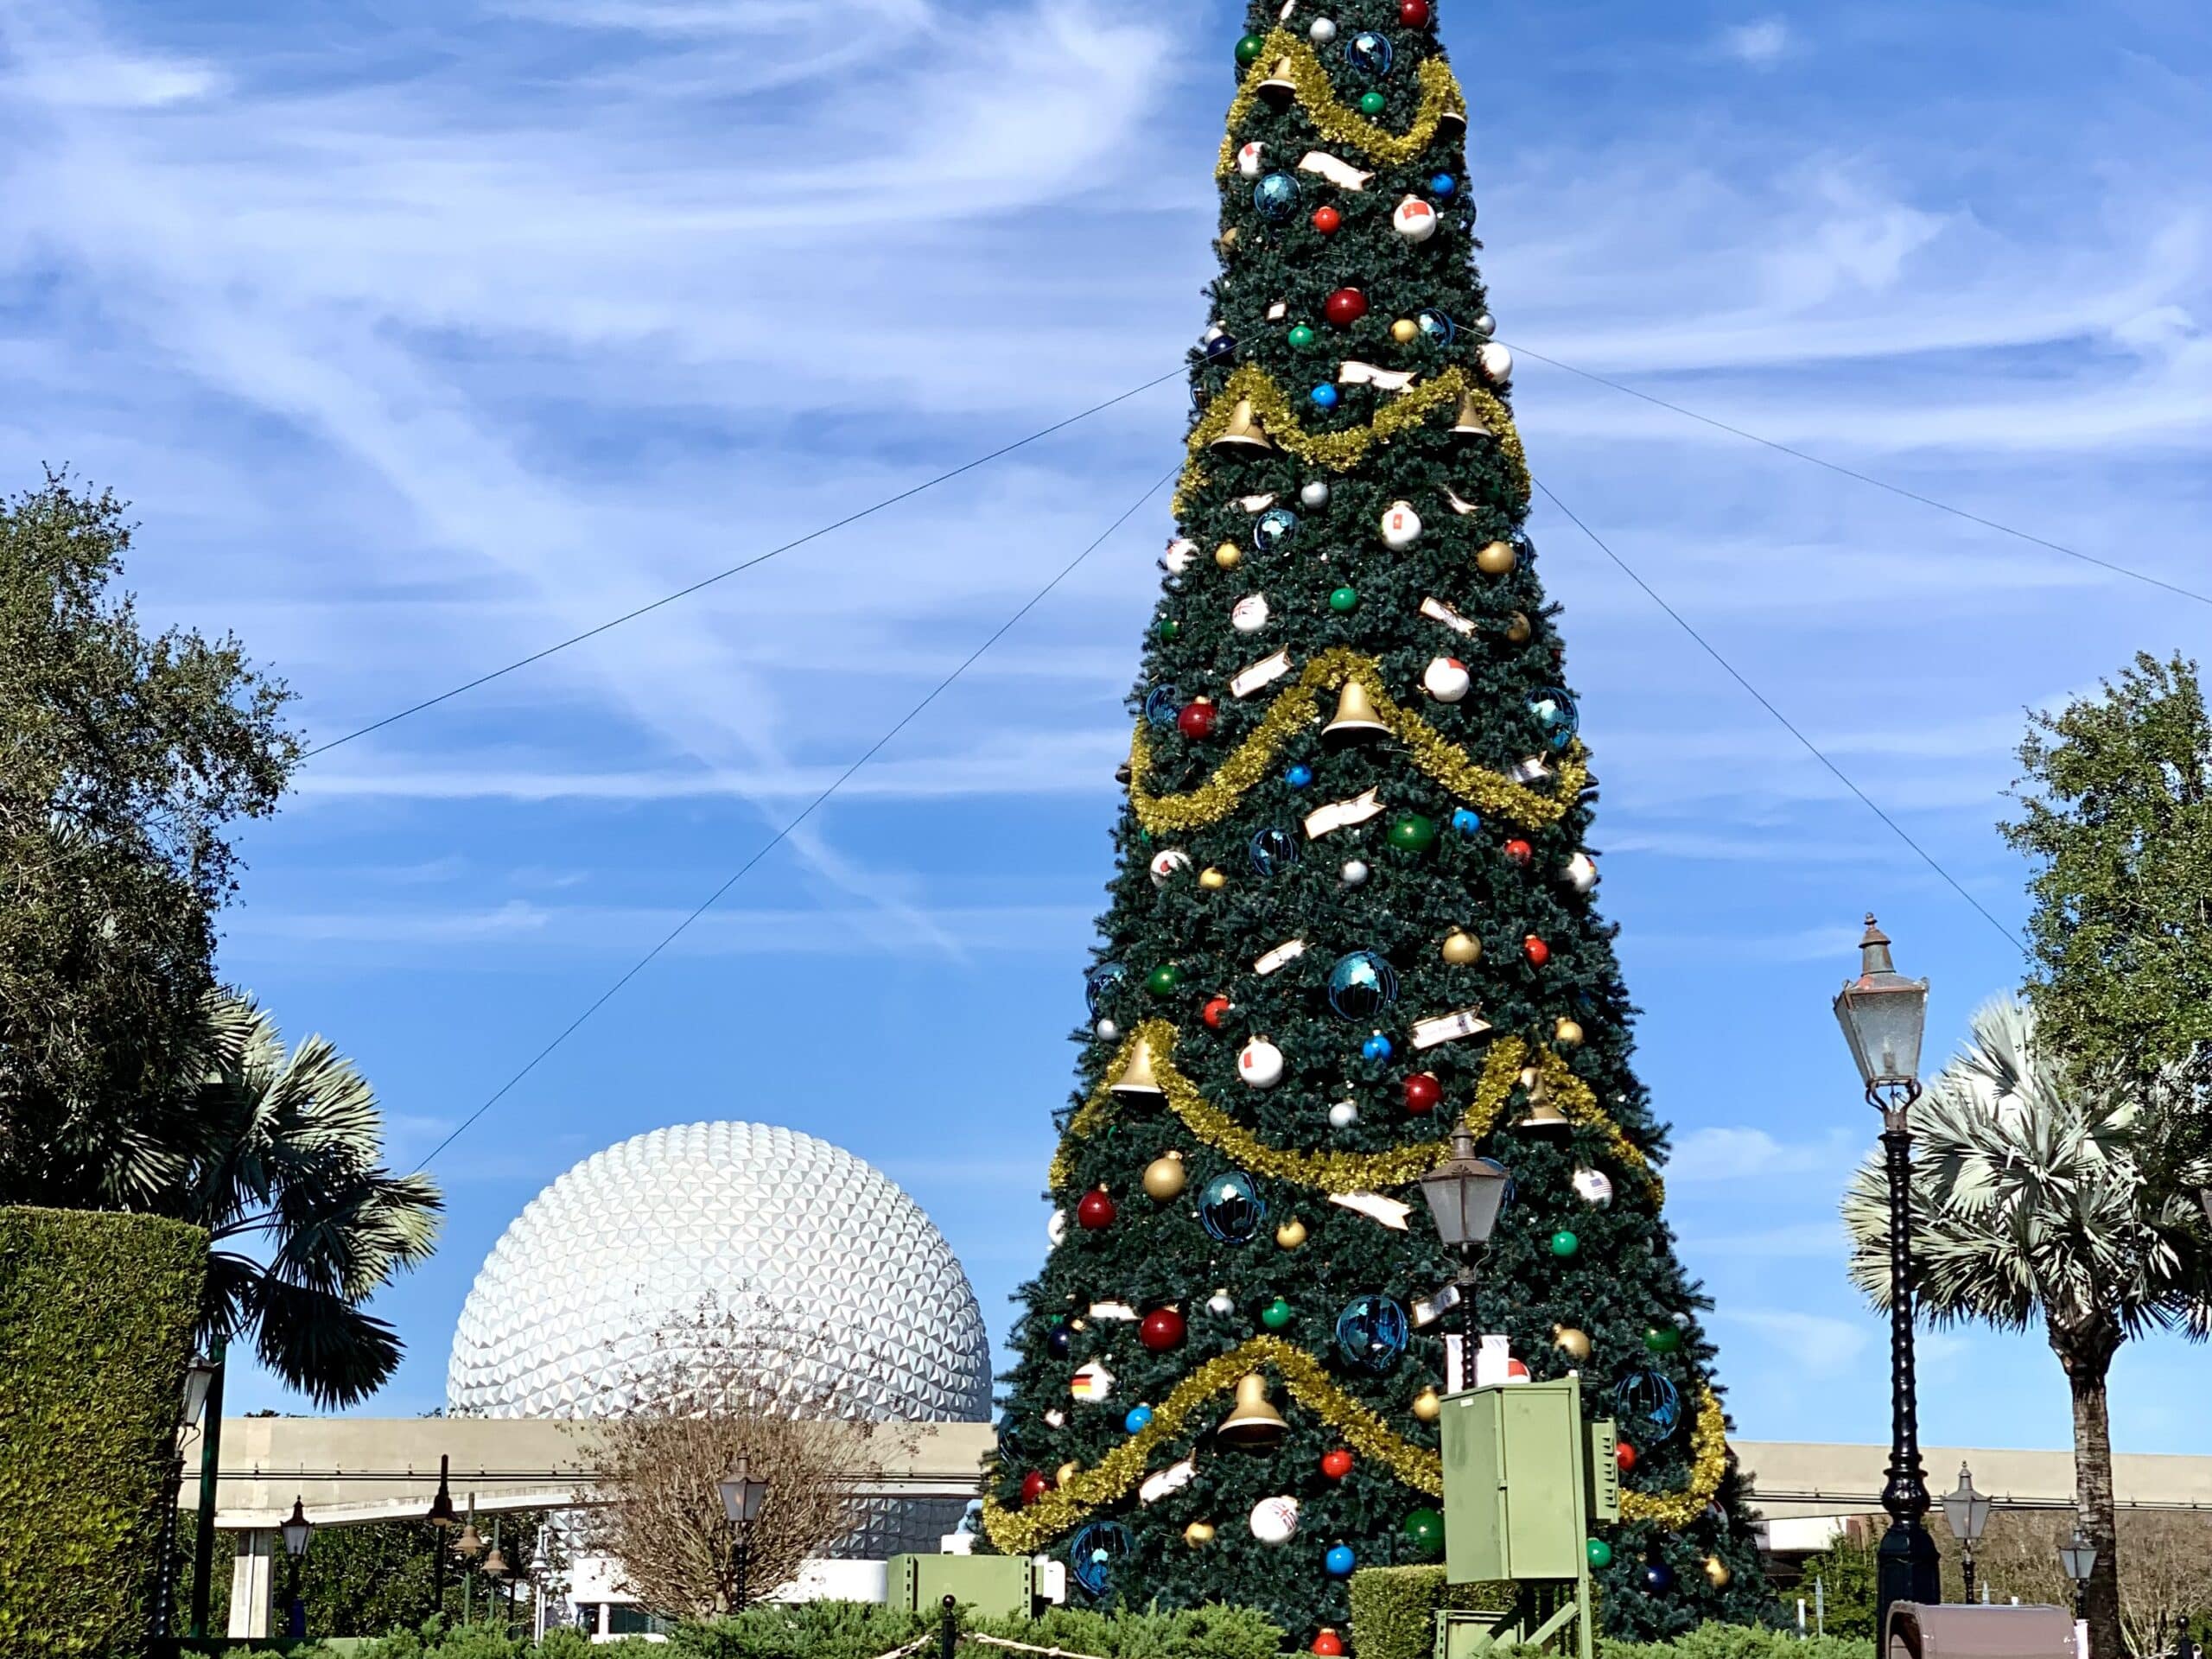 Here's How to Plan the Perfect Disney World Christmas Vacation